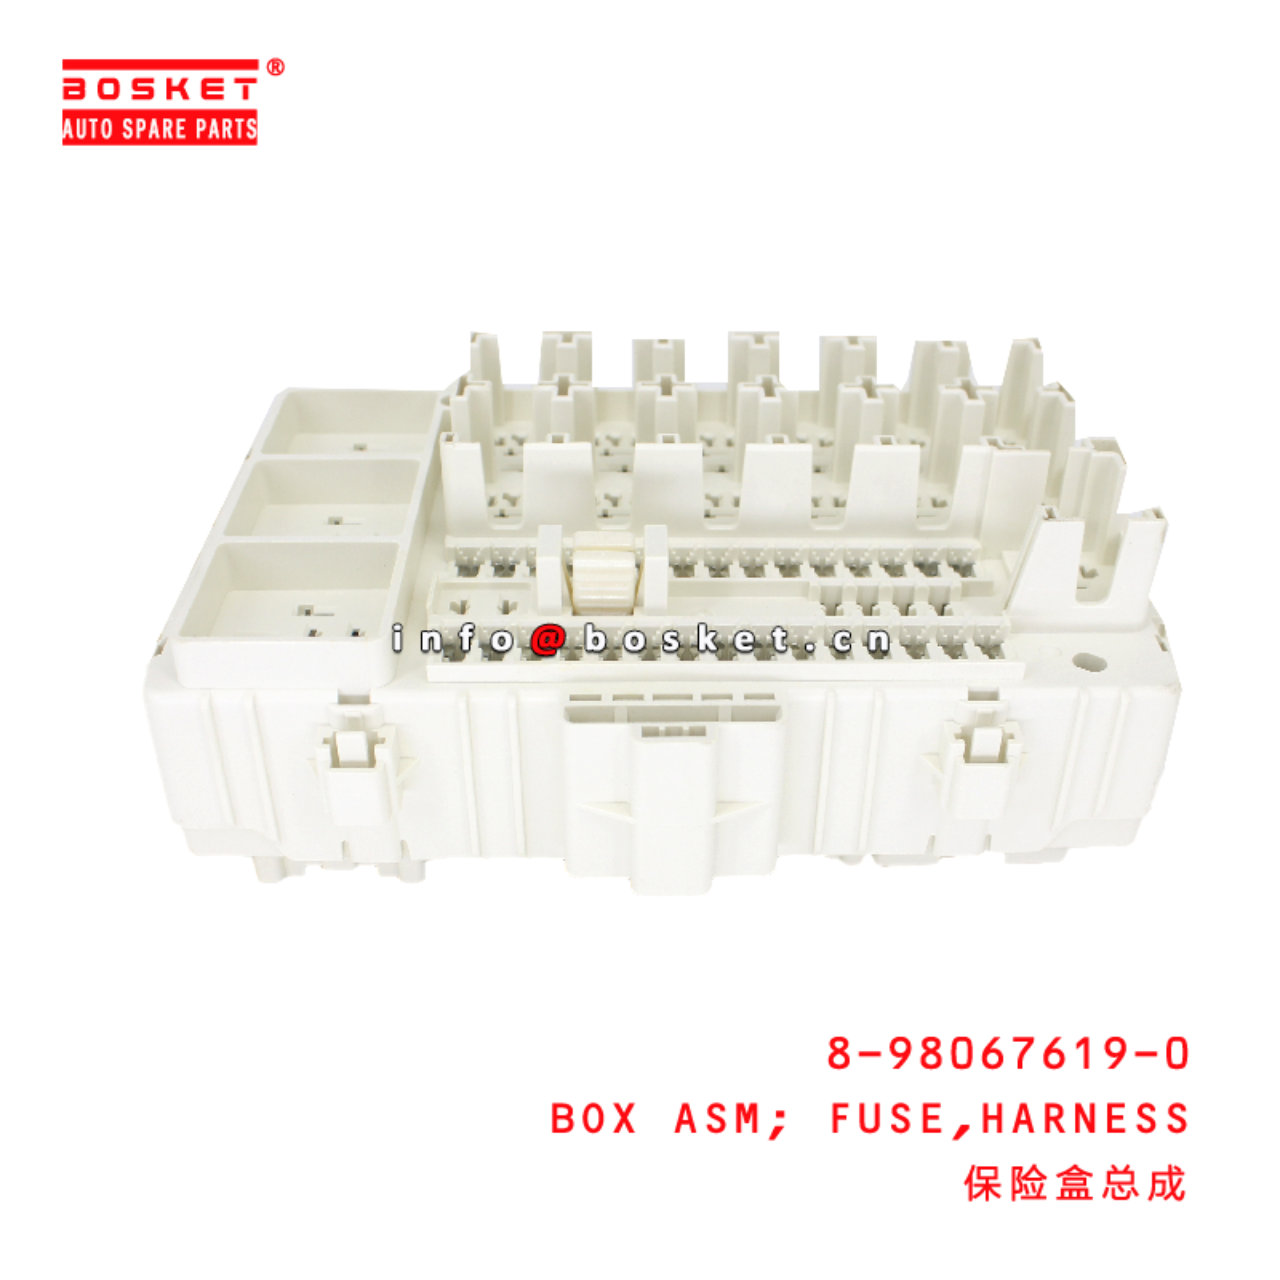 8-98067619-0 Harness Fuse Box Assembly suitable for ISUZU 700P 4HK1 8980676190